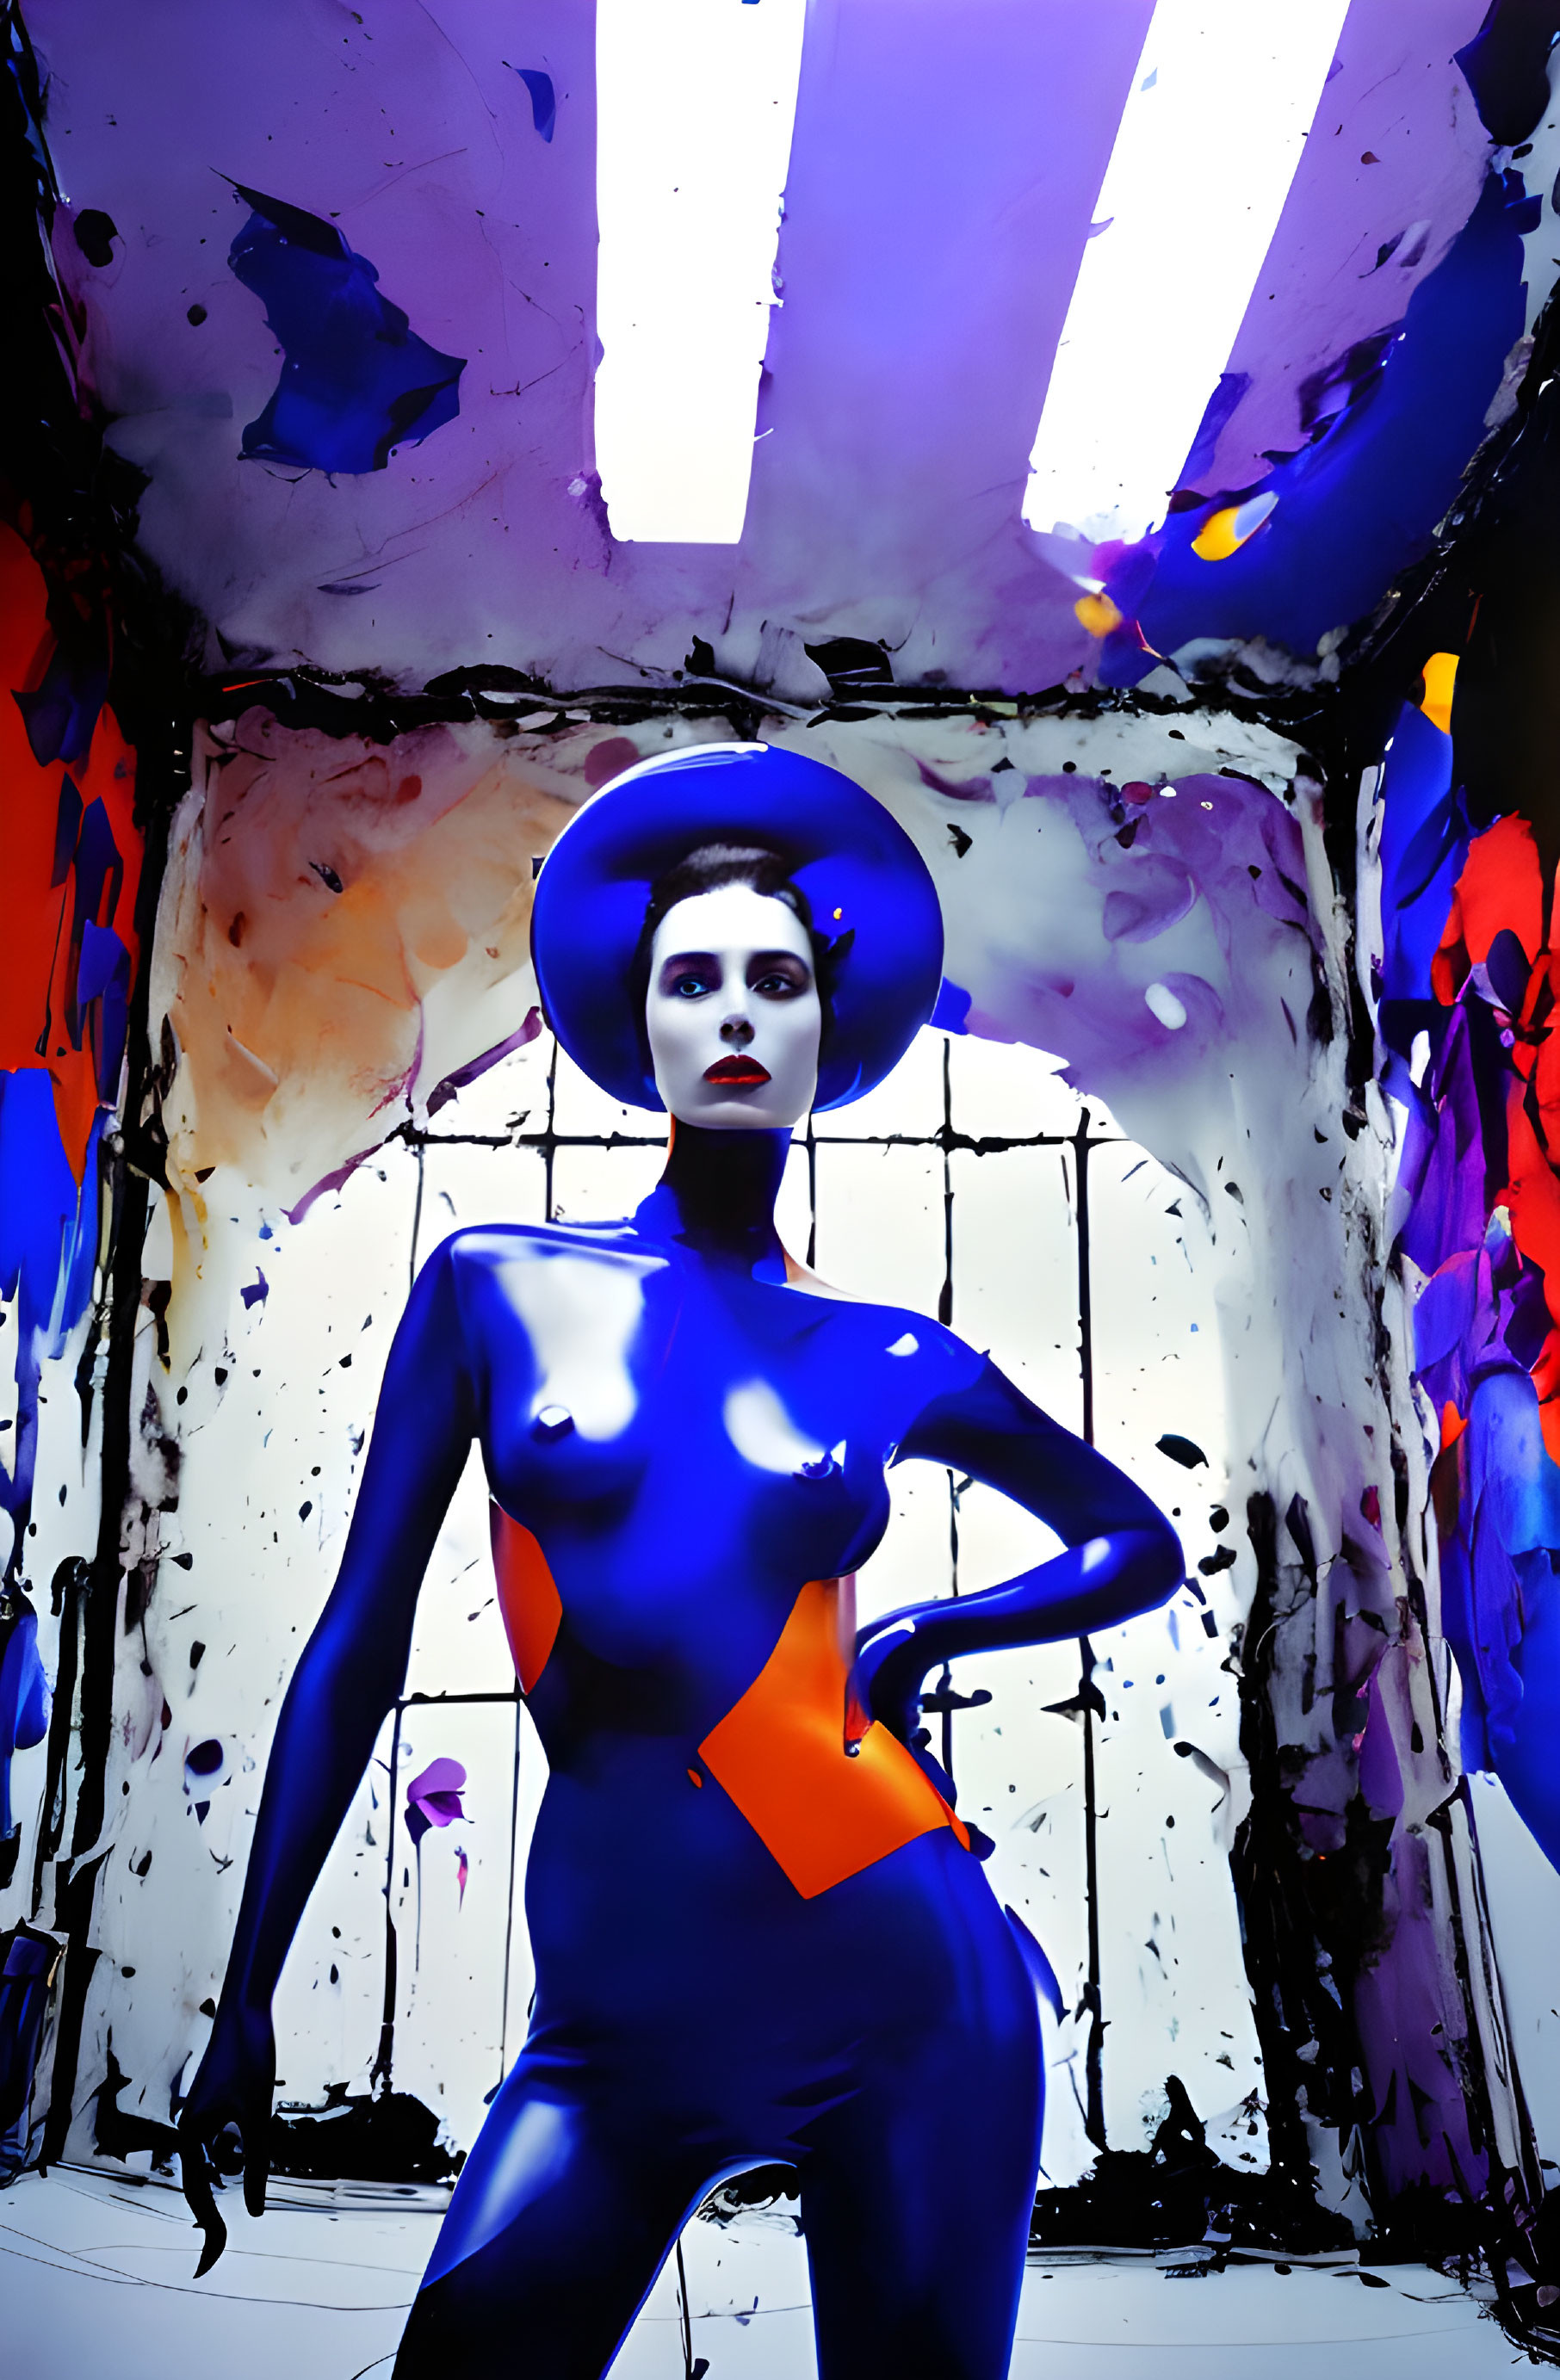 Fashion Photography in Extravagant Colors - II